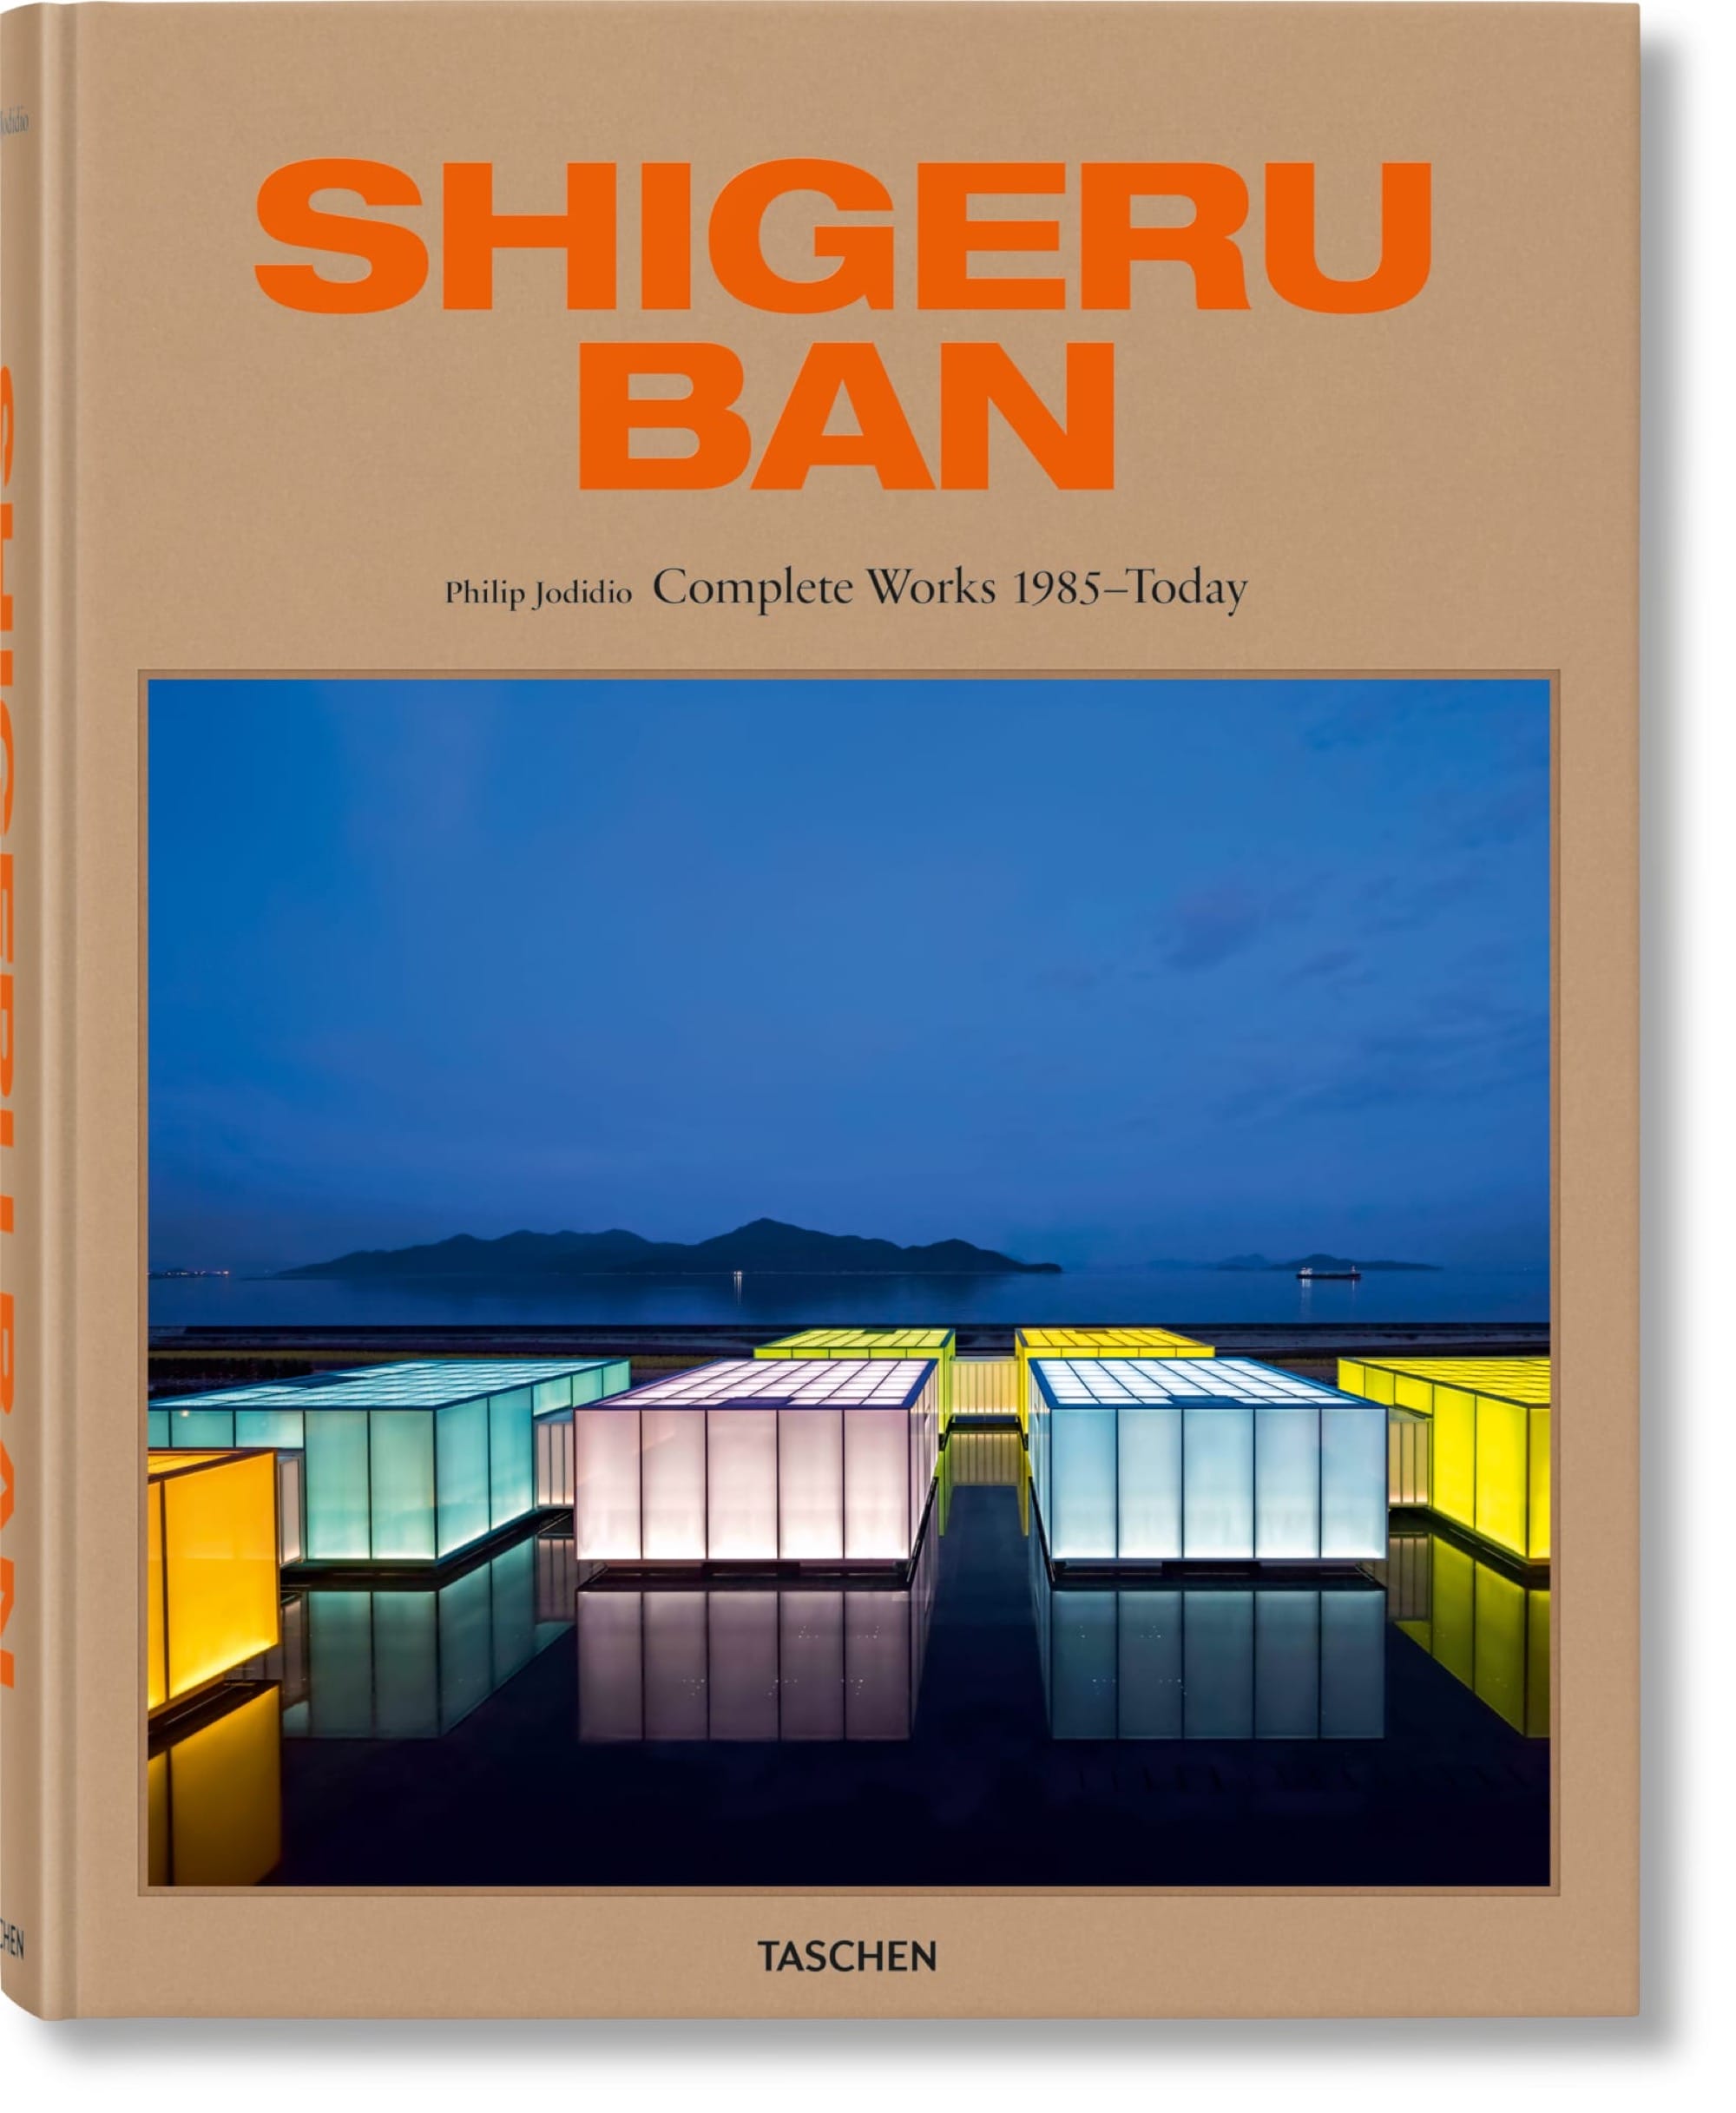 the cover of the book 'Shigeru Ban. Complete Works 1985-Today'